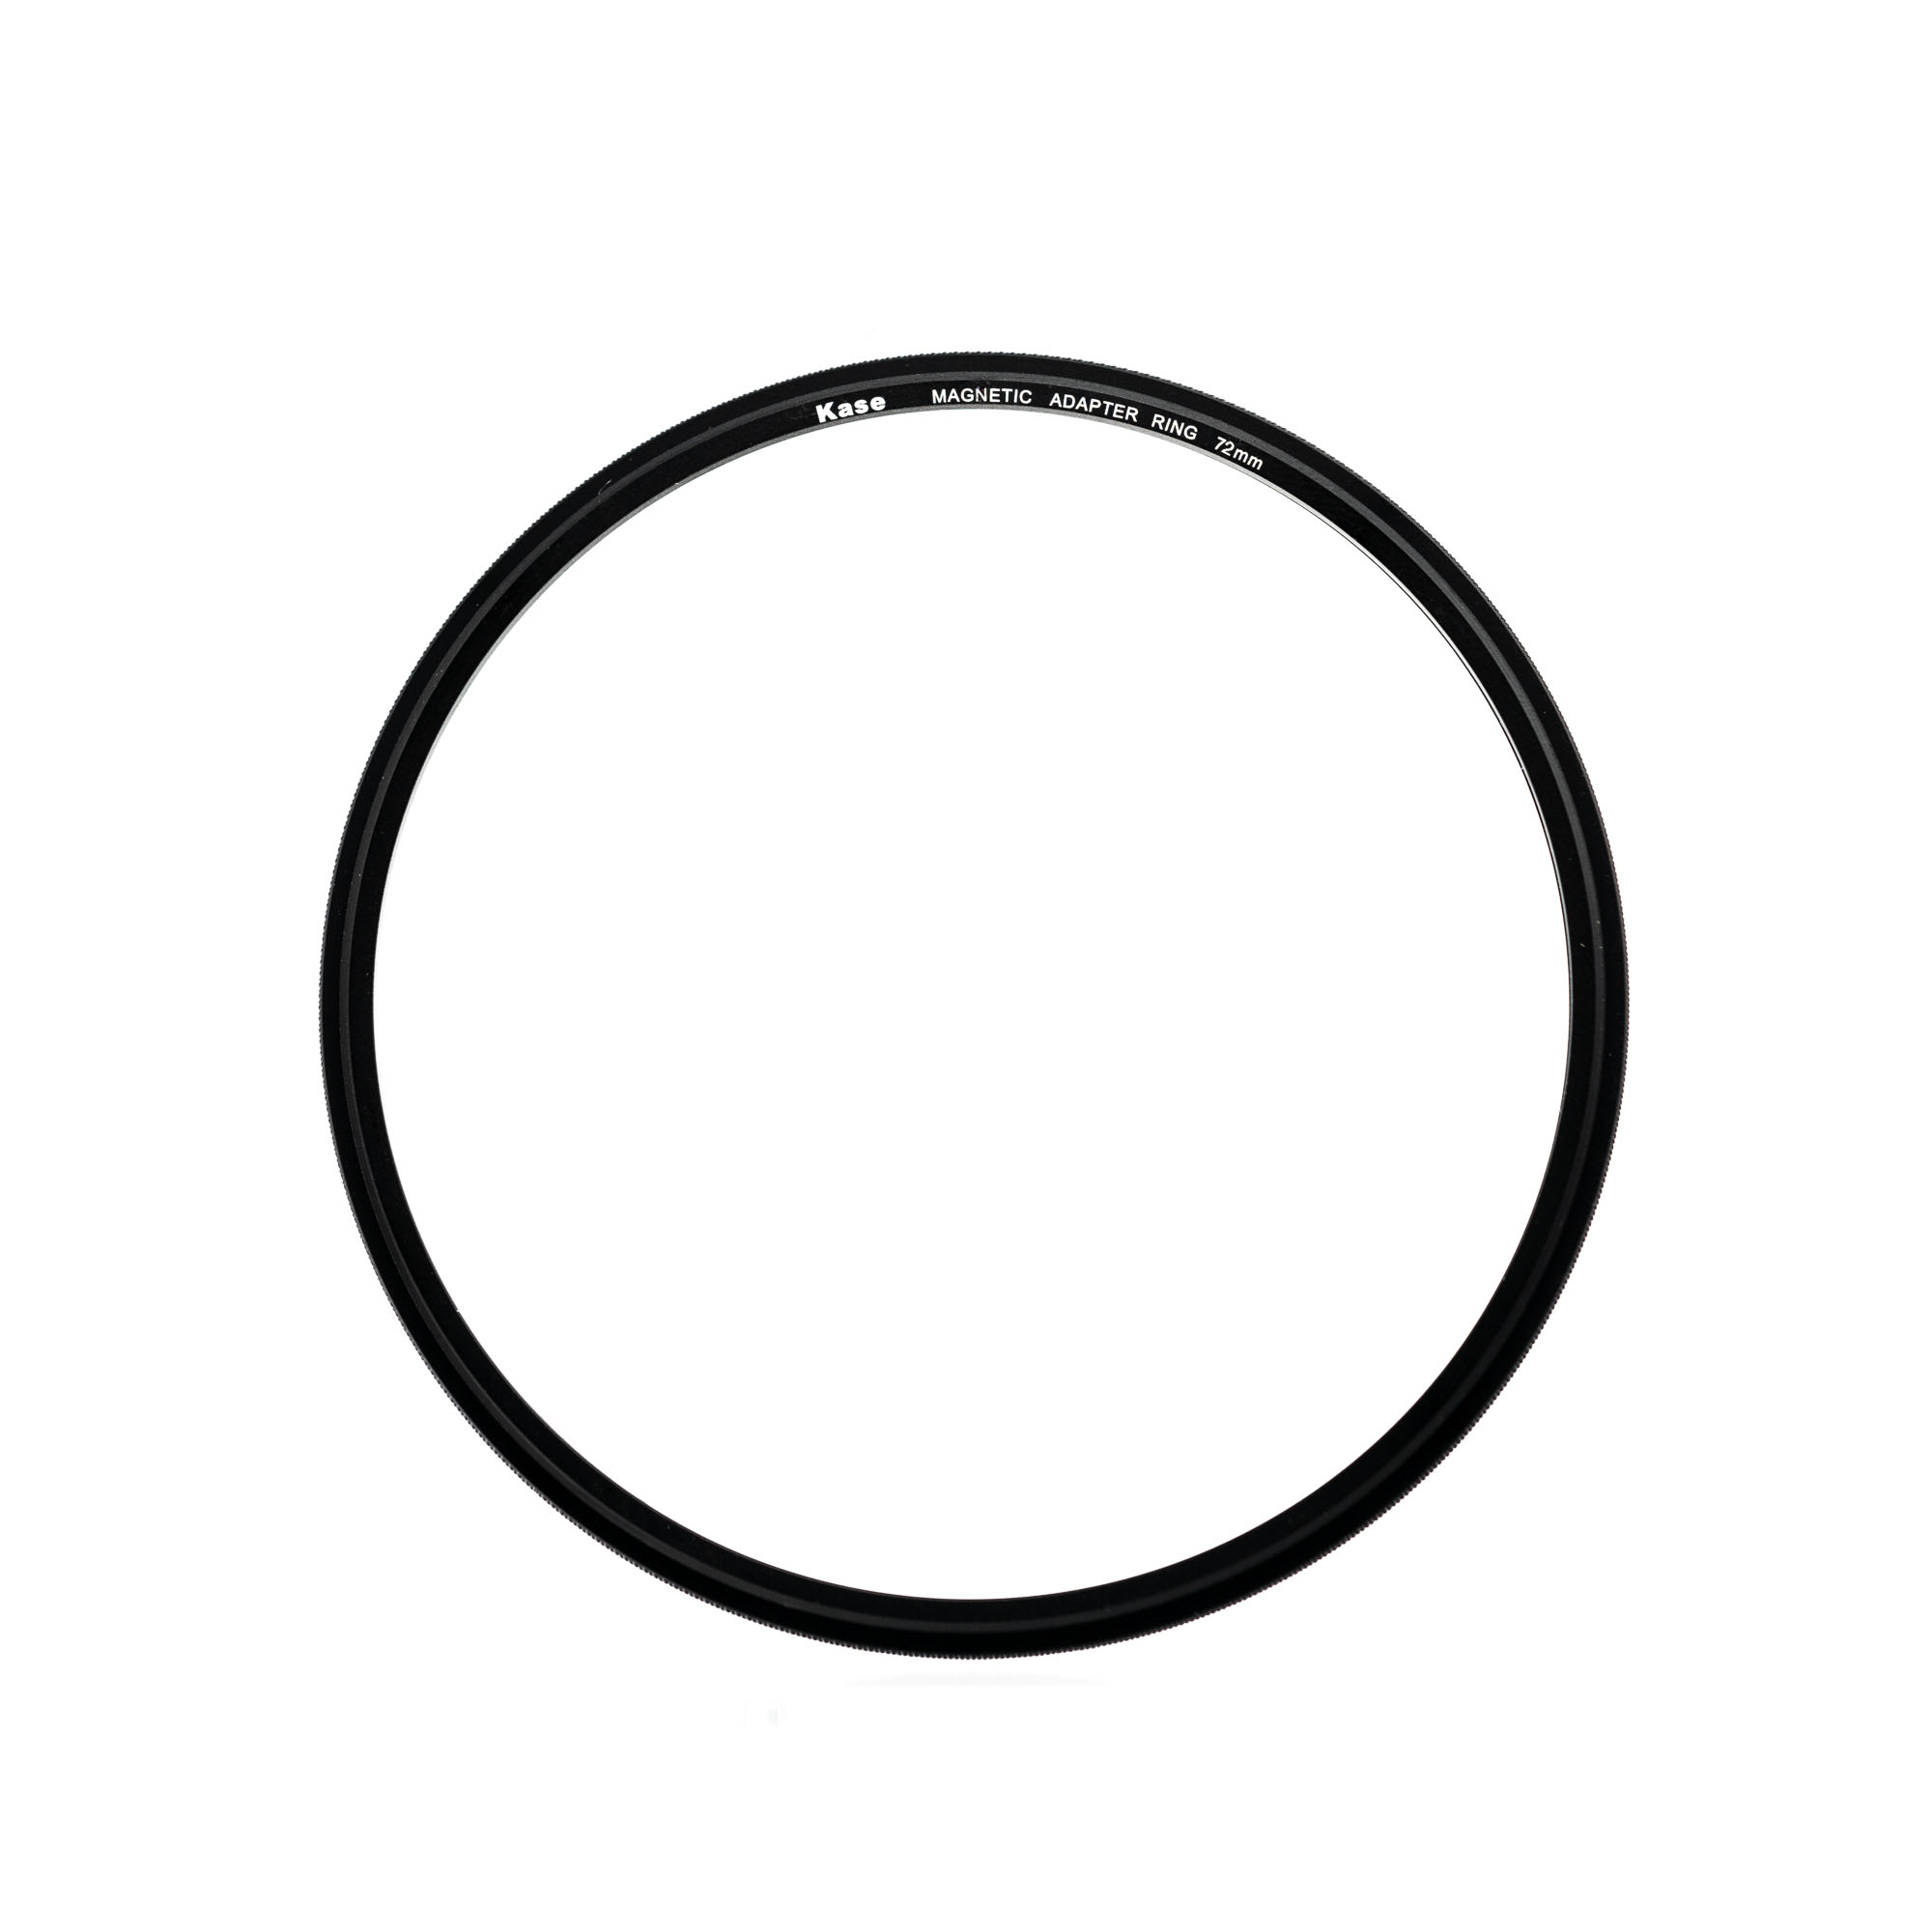 Kase Wolverine 72mm to 112mm Magnetic Step Up Filter Ring Adapter 72 112 